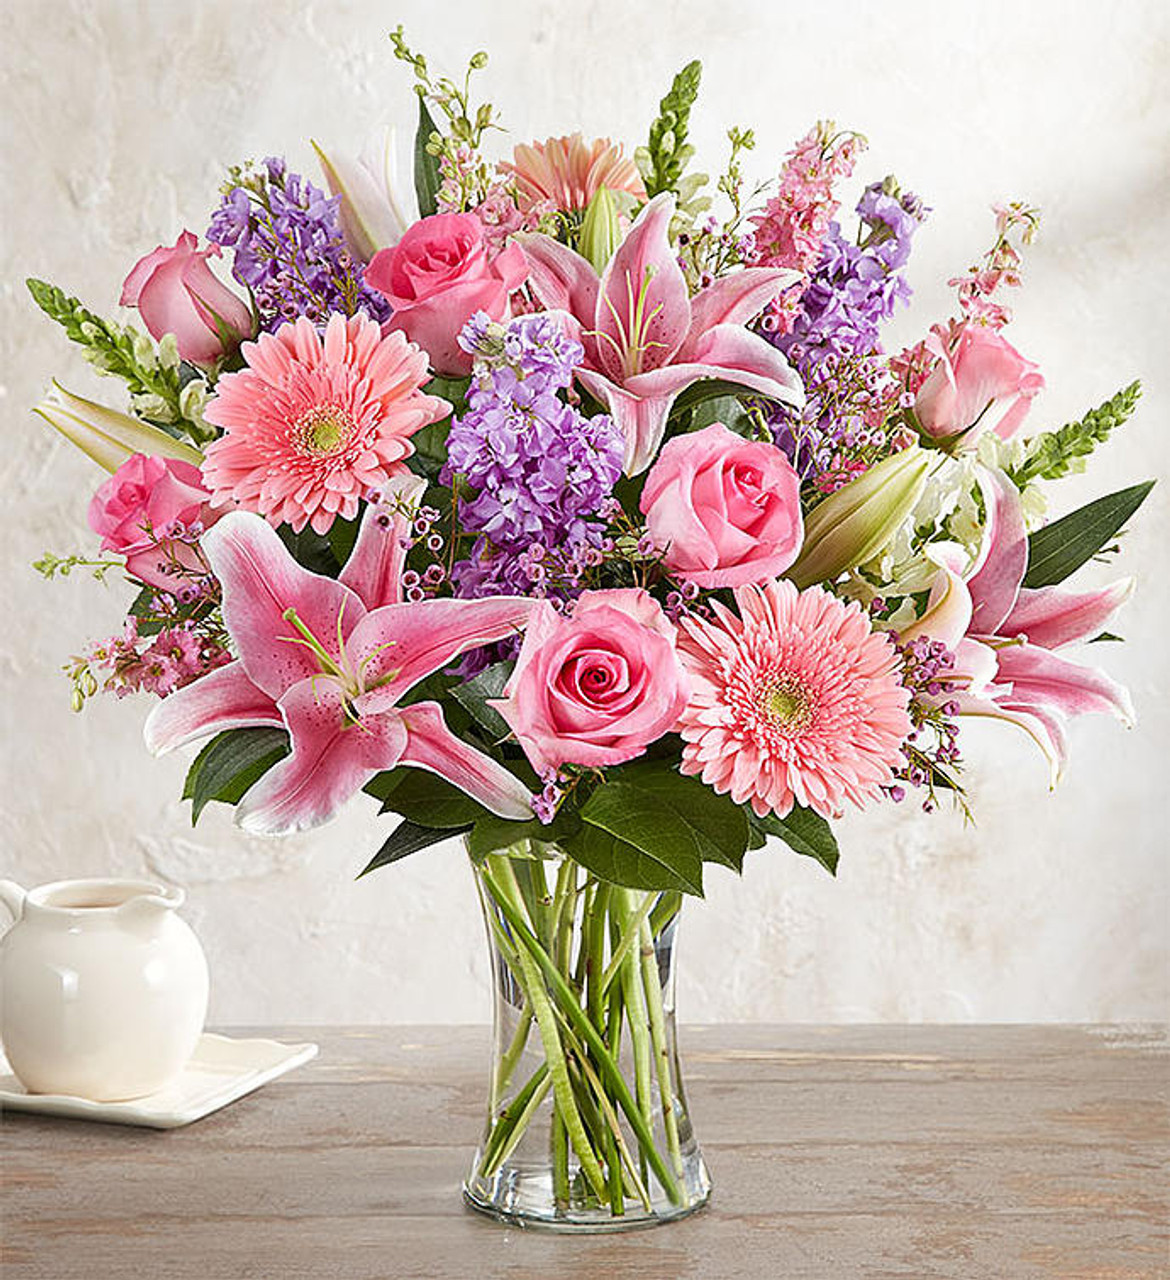 Mixed Flowers: Mixed Flower Assortments - The Bouqs Co.